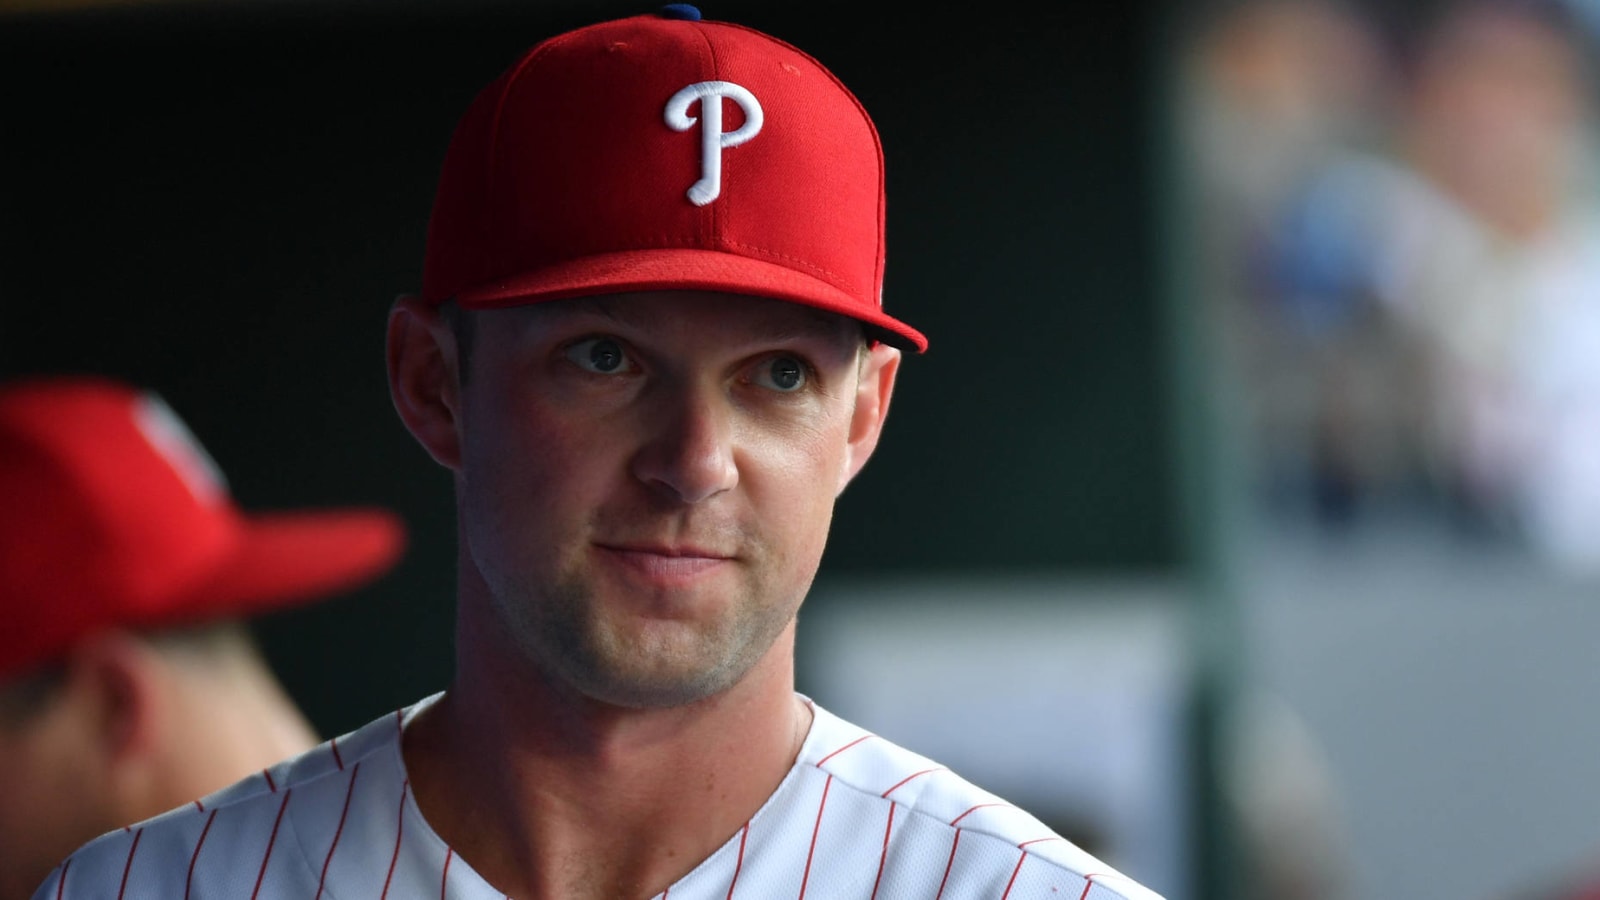 Rhys Hoskins aiming to get activated from IL this week